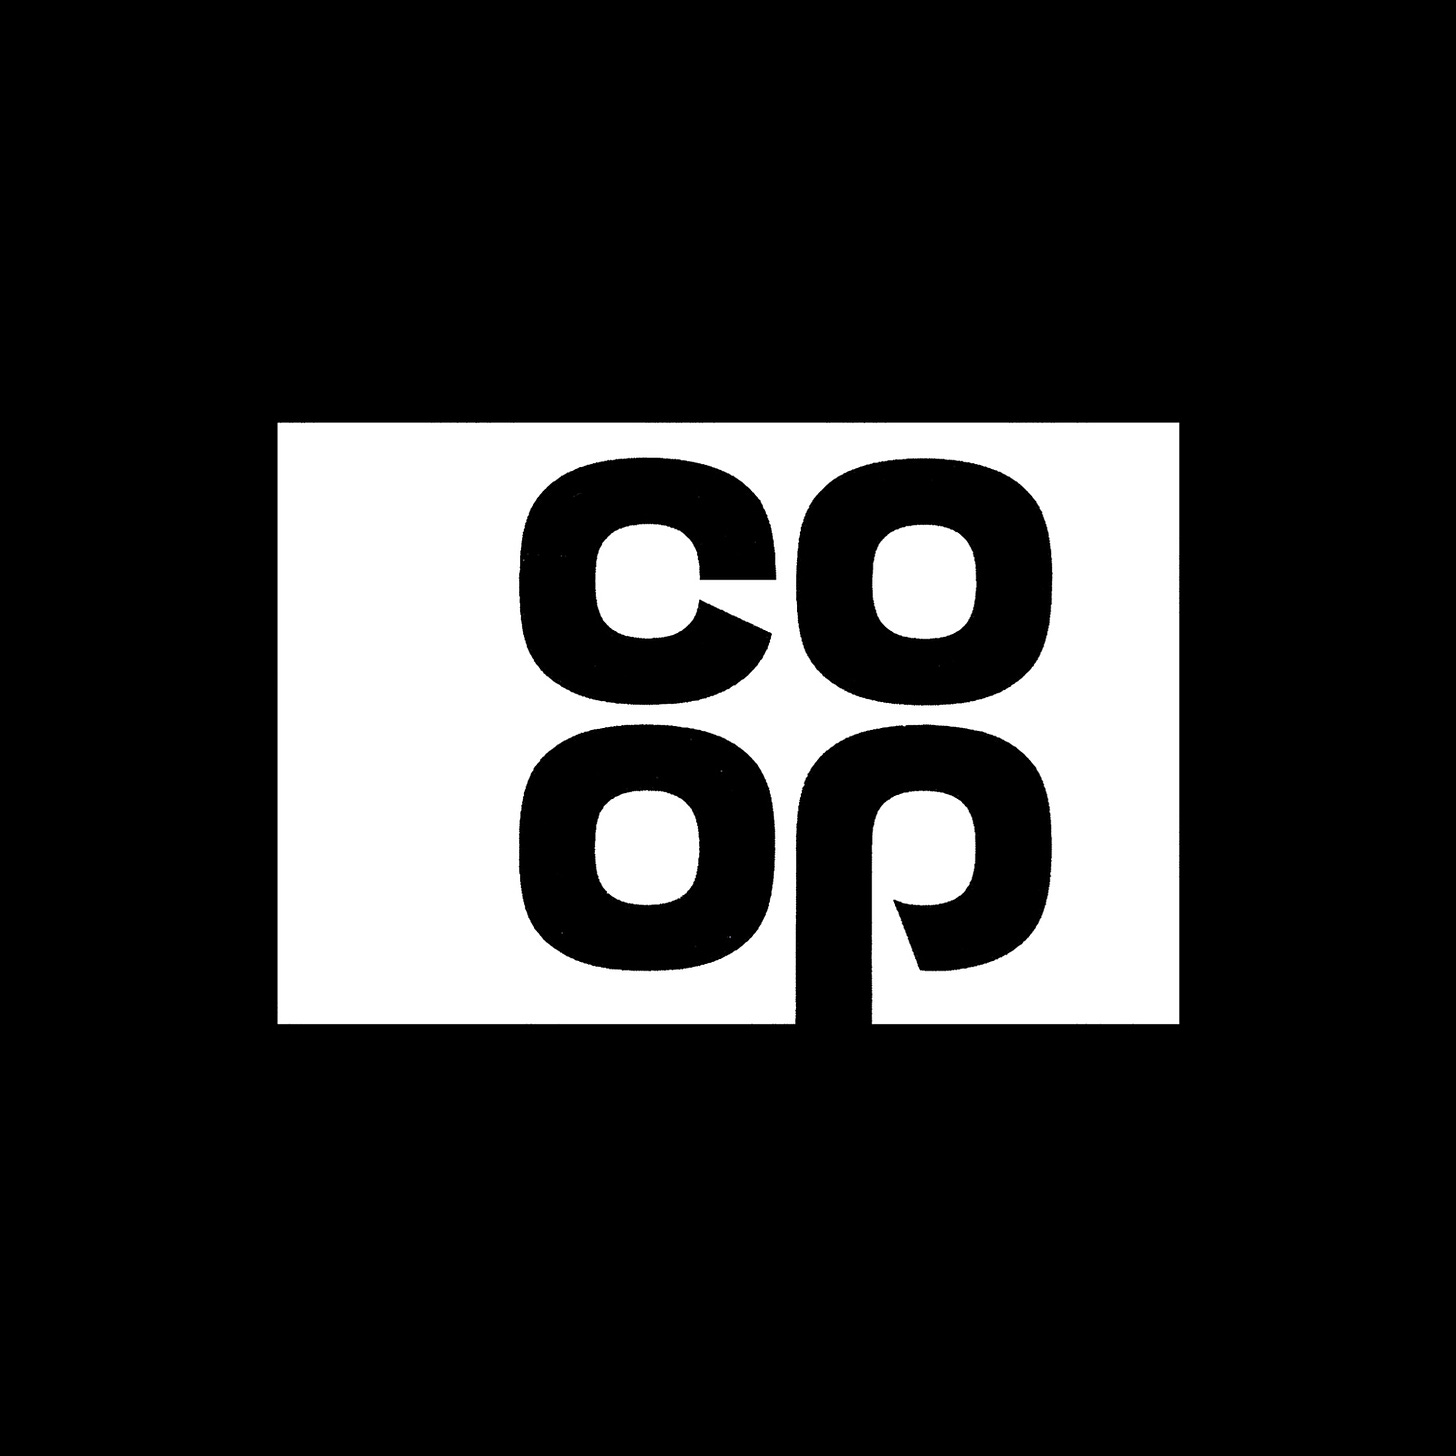 Lippincott & Margulies's 1967 logo for the Co-operative Great Britain